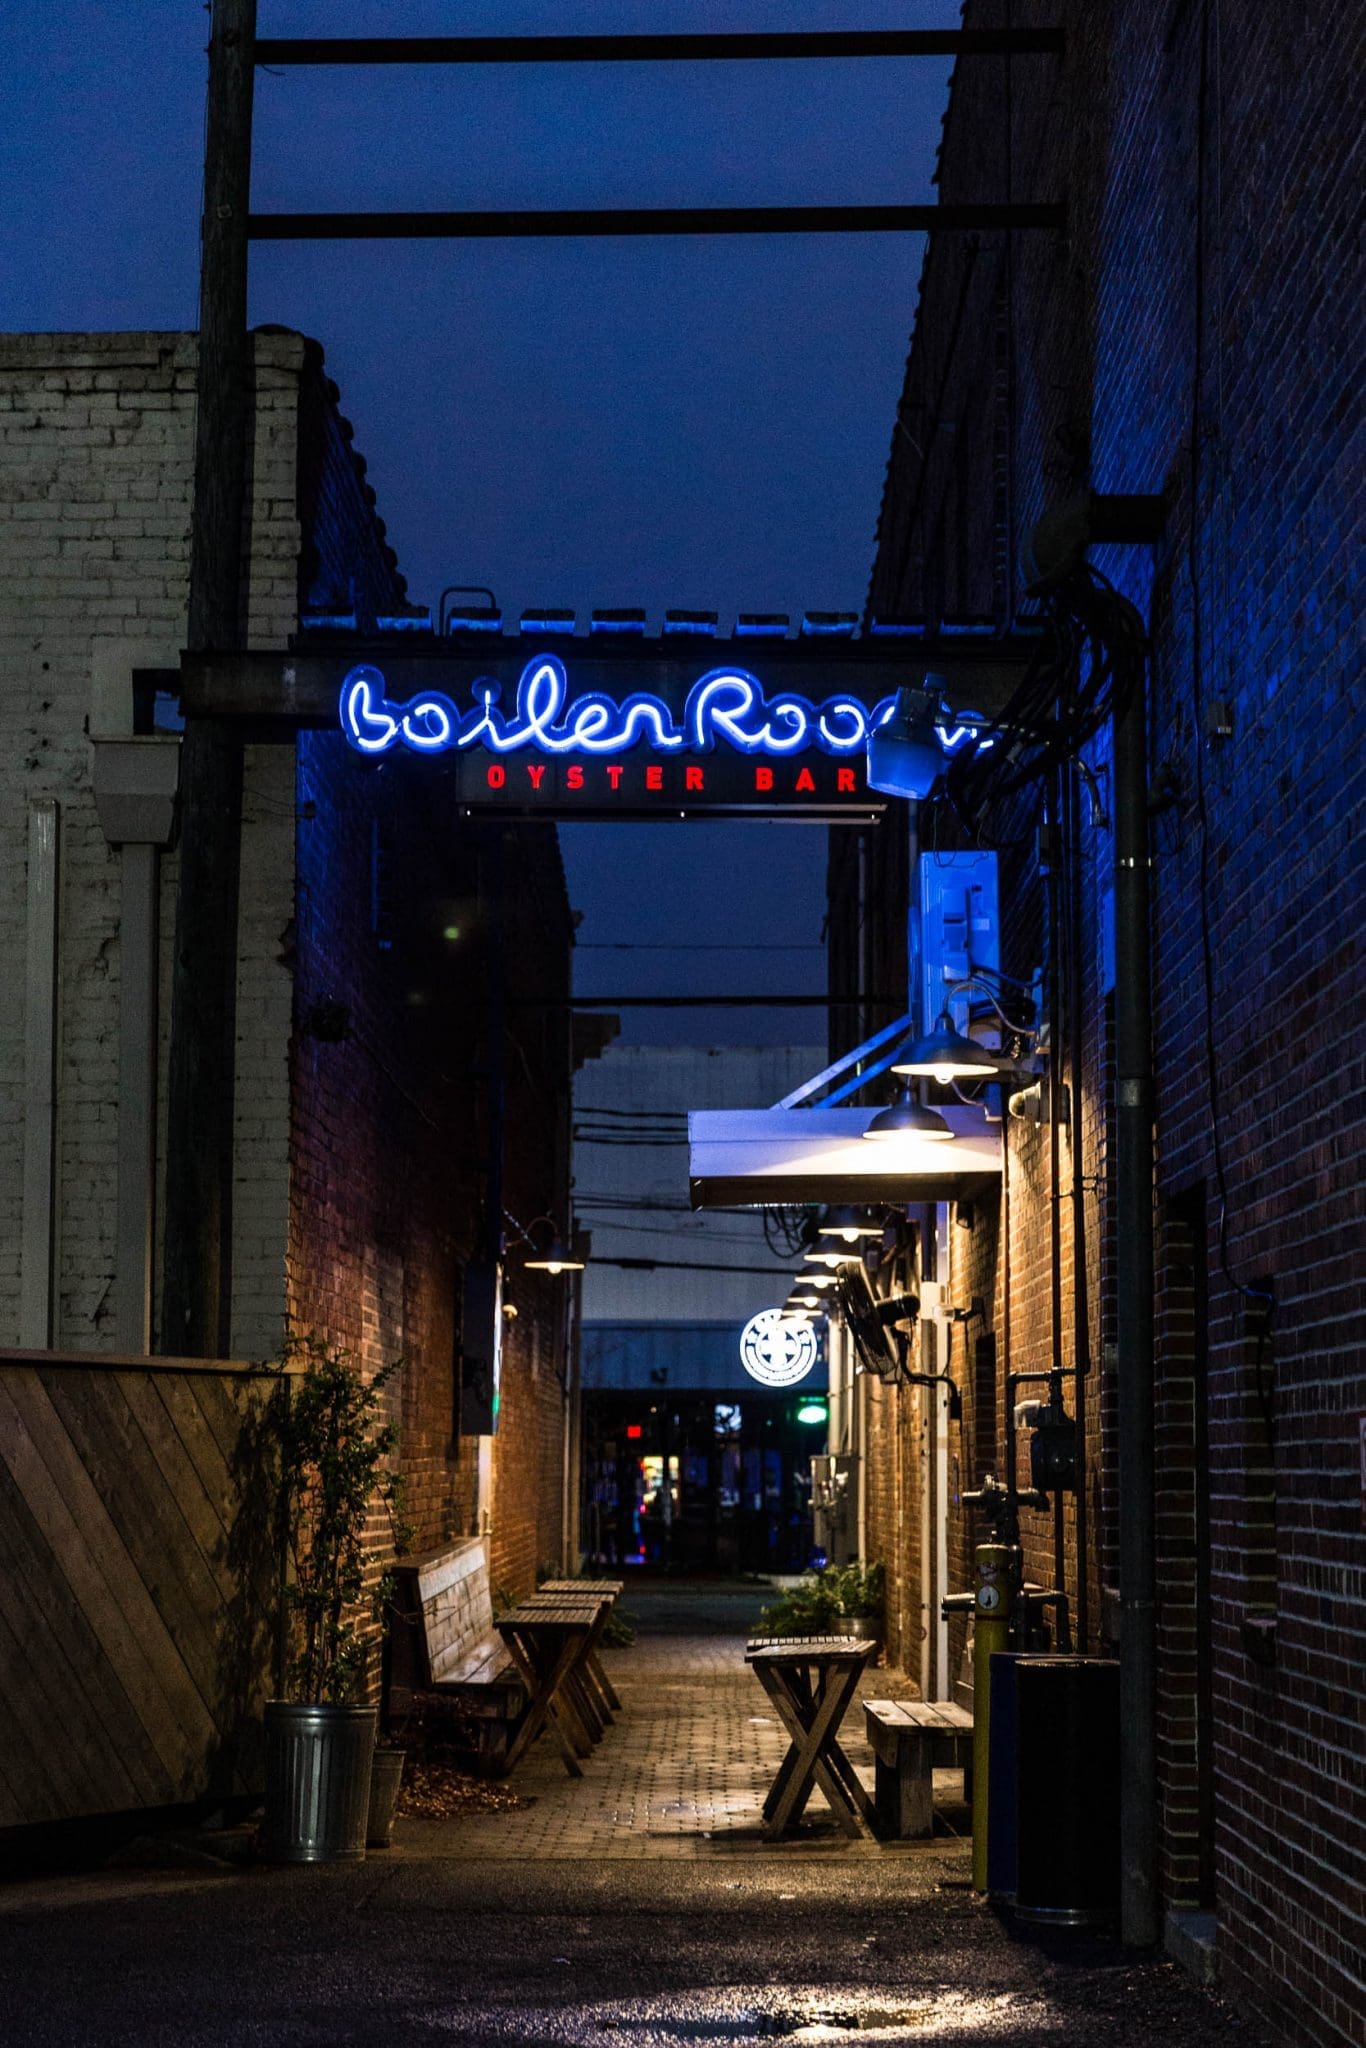 An evening shot of an alleyway with a restaurant sign and tables. The sign reads "Boiler Room Oyster Bar"